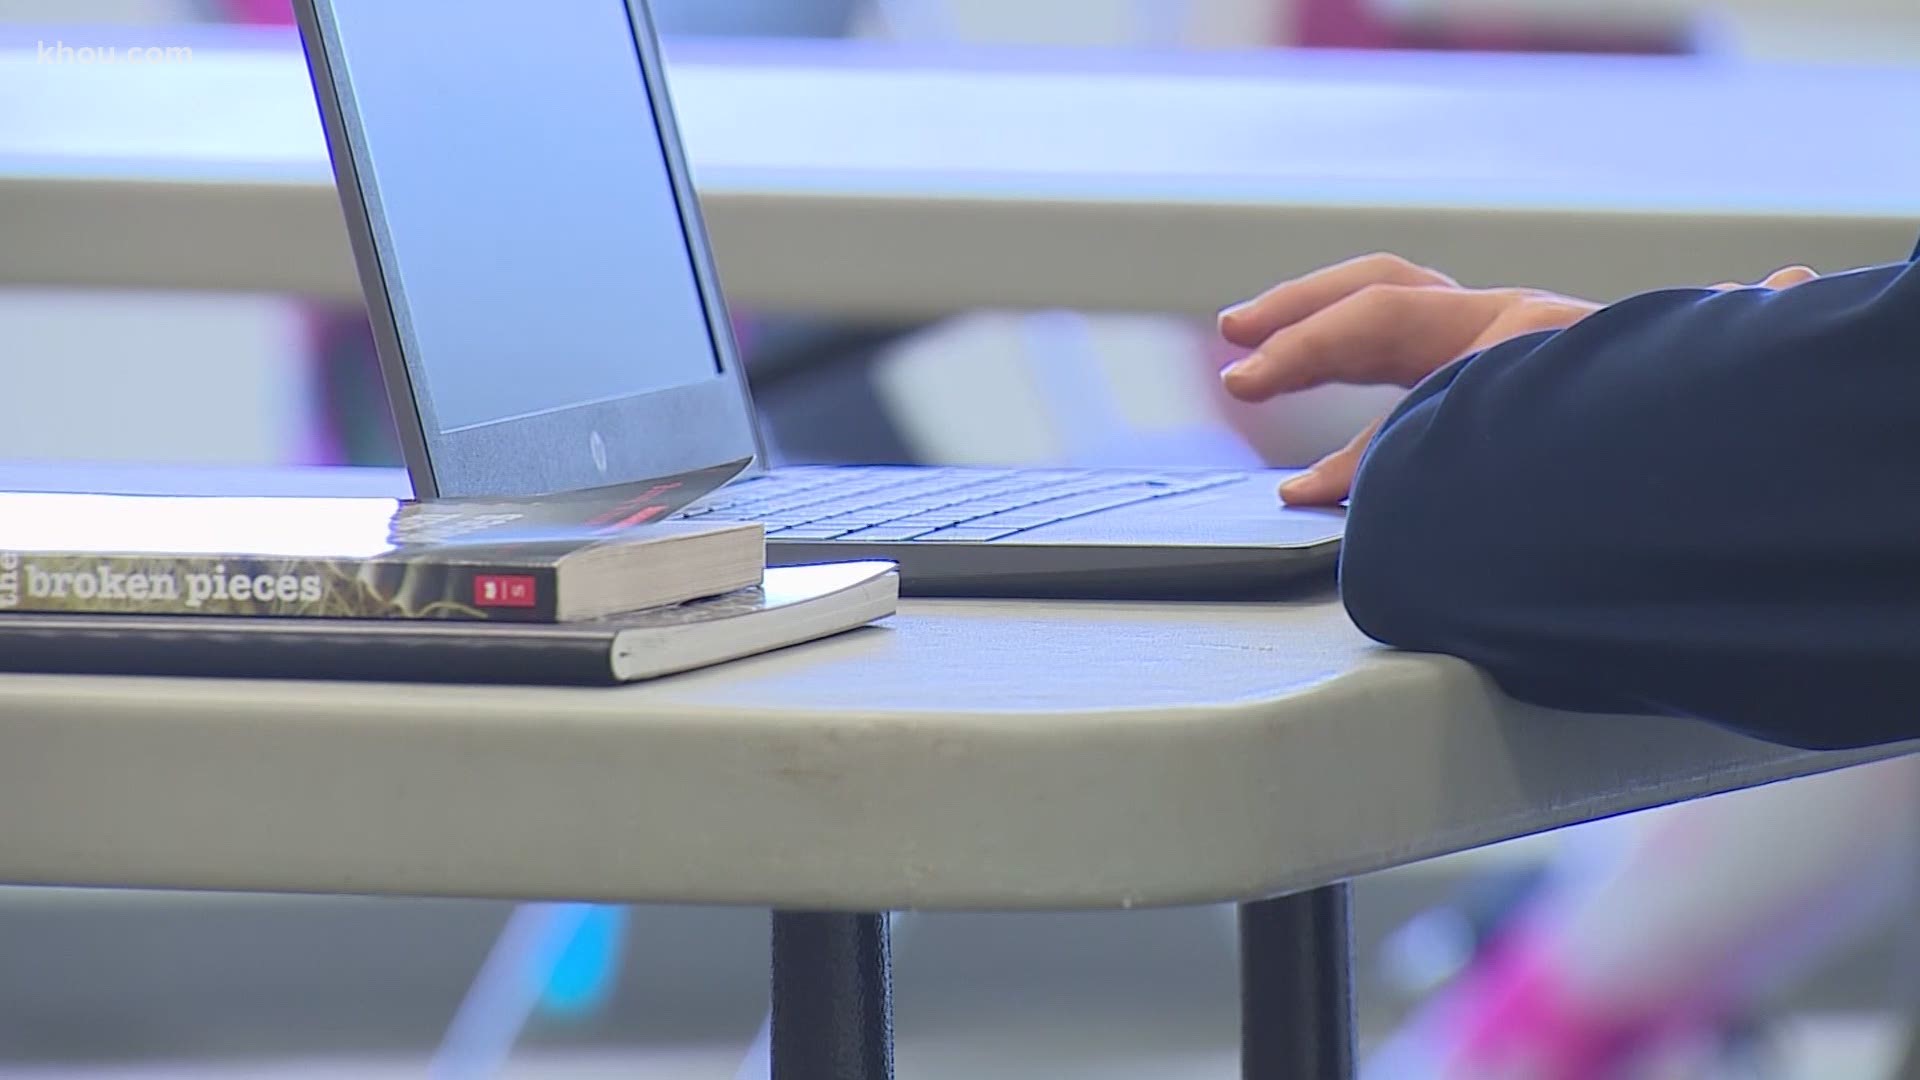 Aldine ISD has extended remote learning through Sept. 11 while Fort Bend ISD is considering delaying the start of face-to-face instruction for up to 4 more weeks.